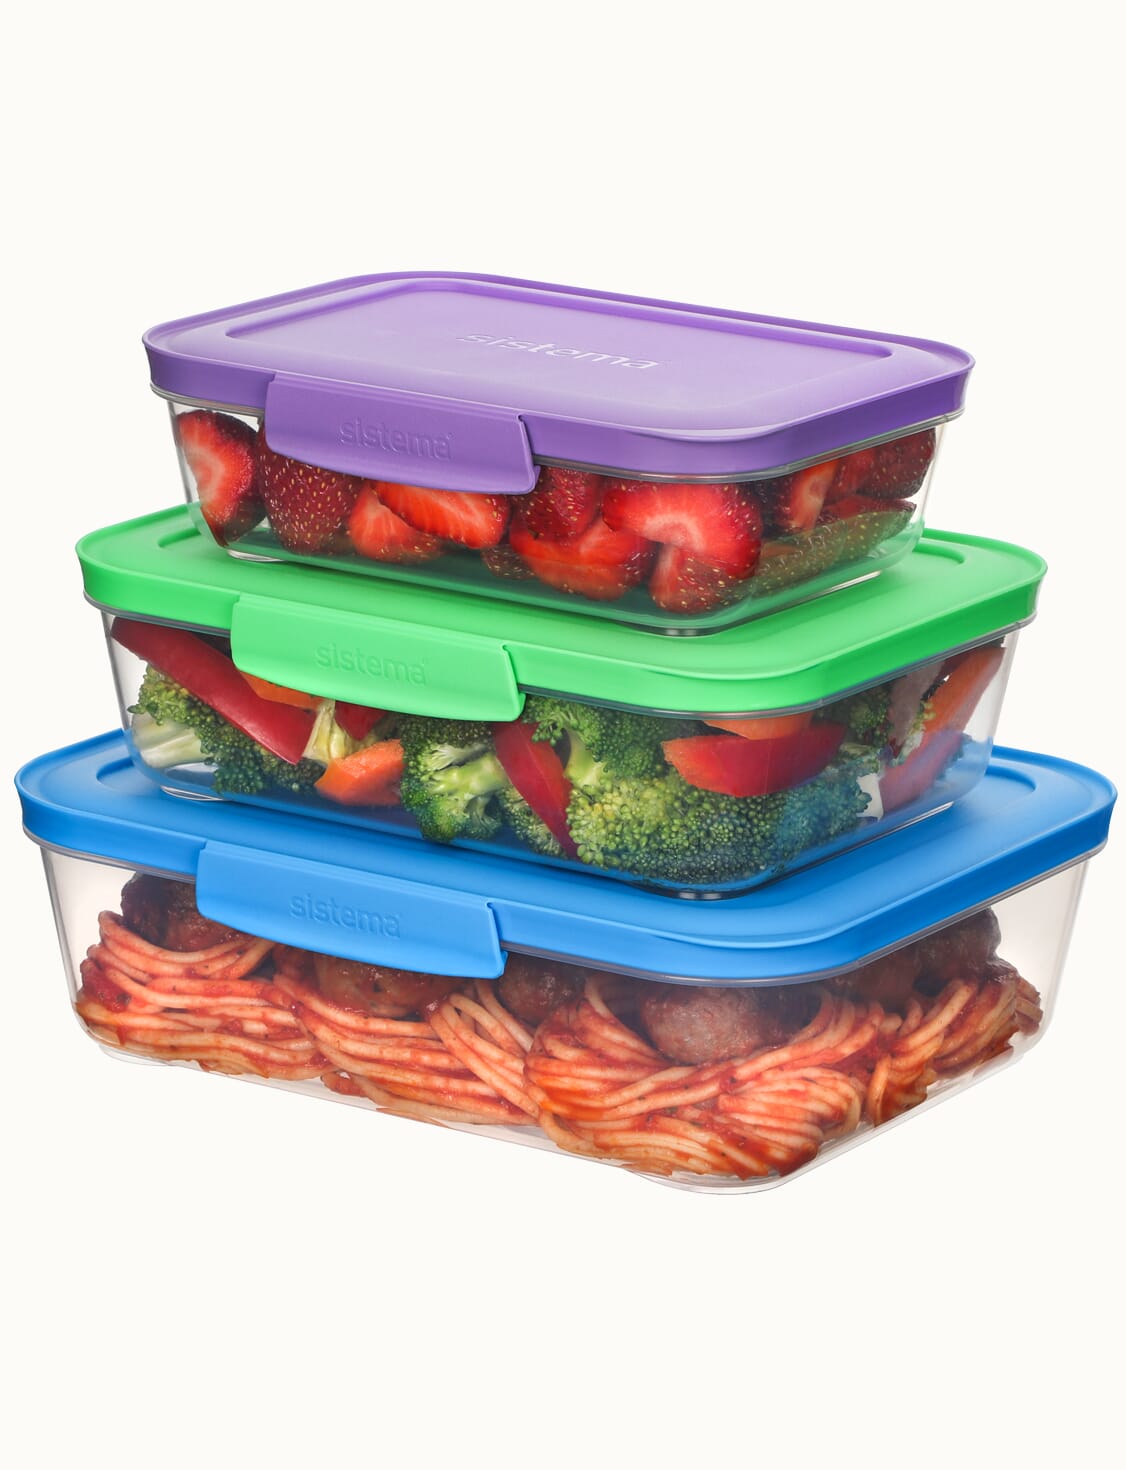 Sistema Nest It Food Storage Containers - 3 ct pkg